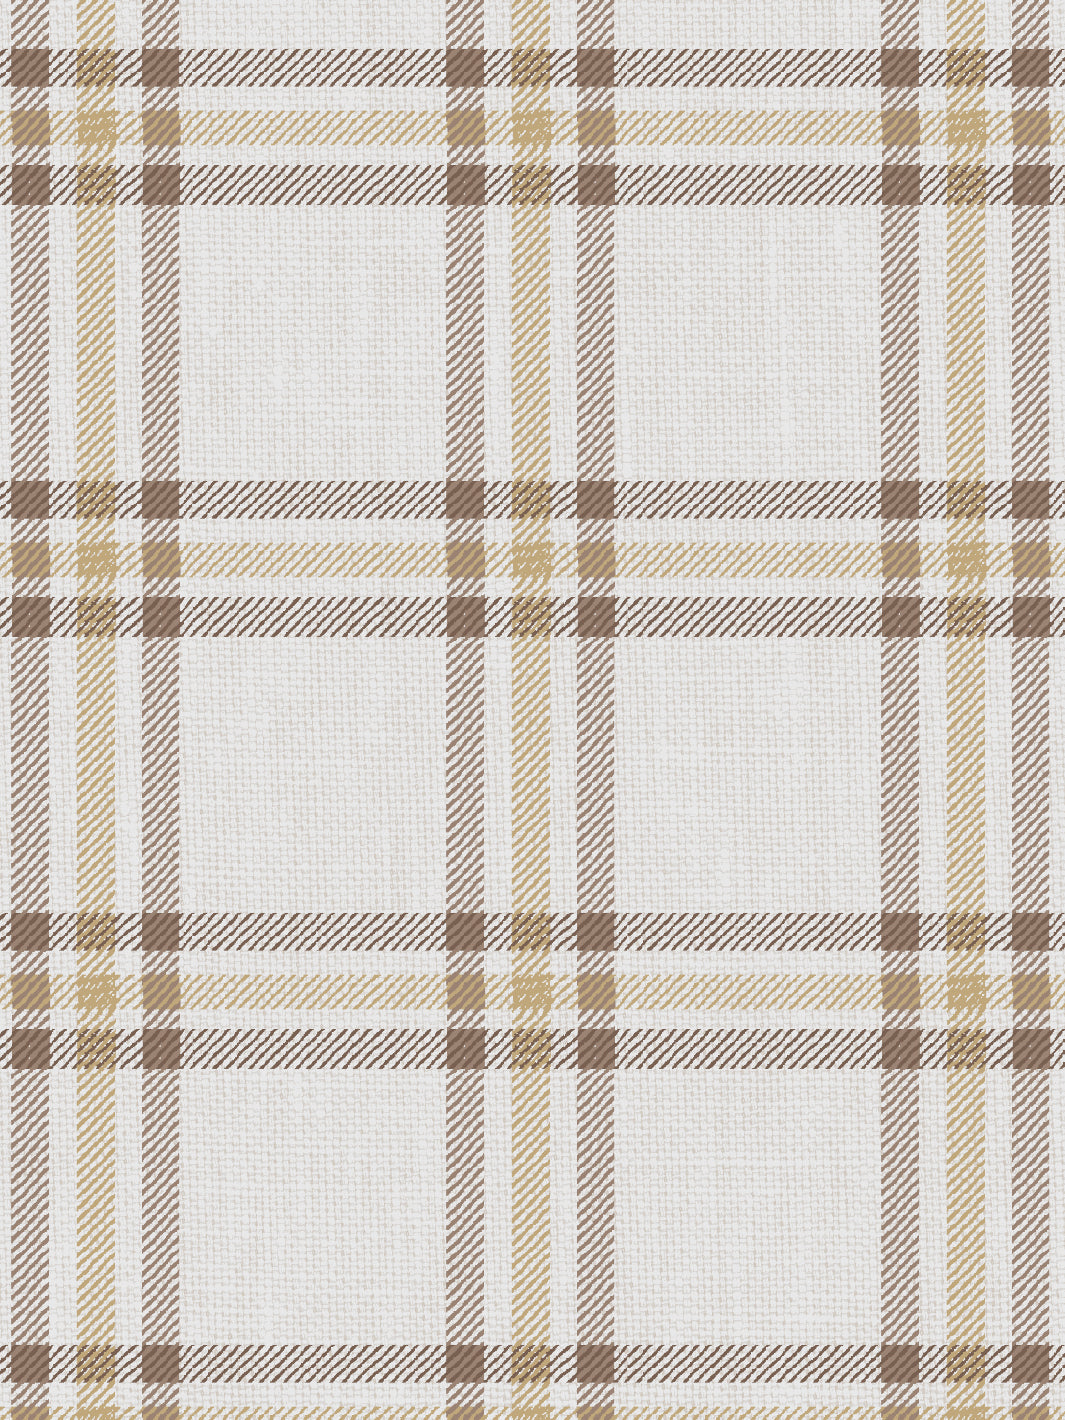 'Rogers Plaid' Wallpaper by Nathan Turner - Brown Gold